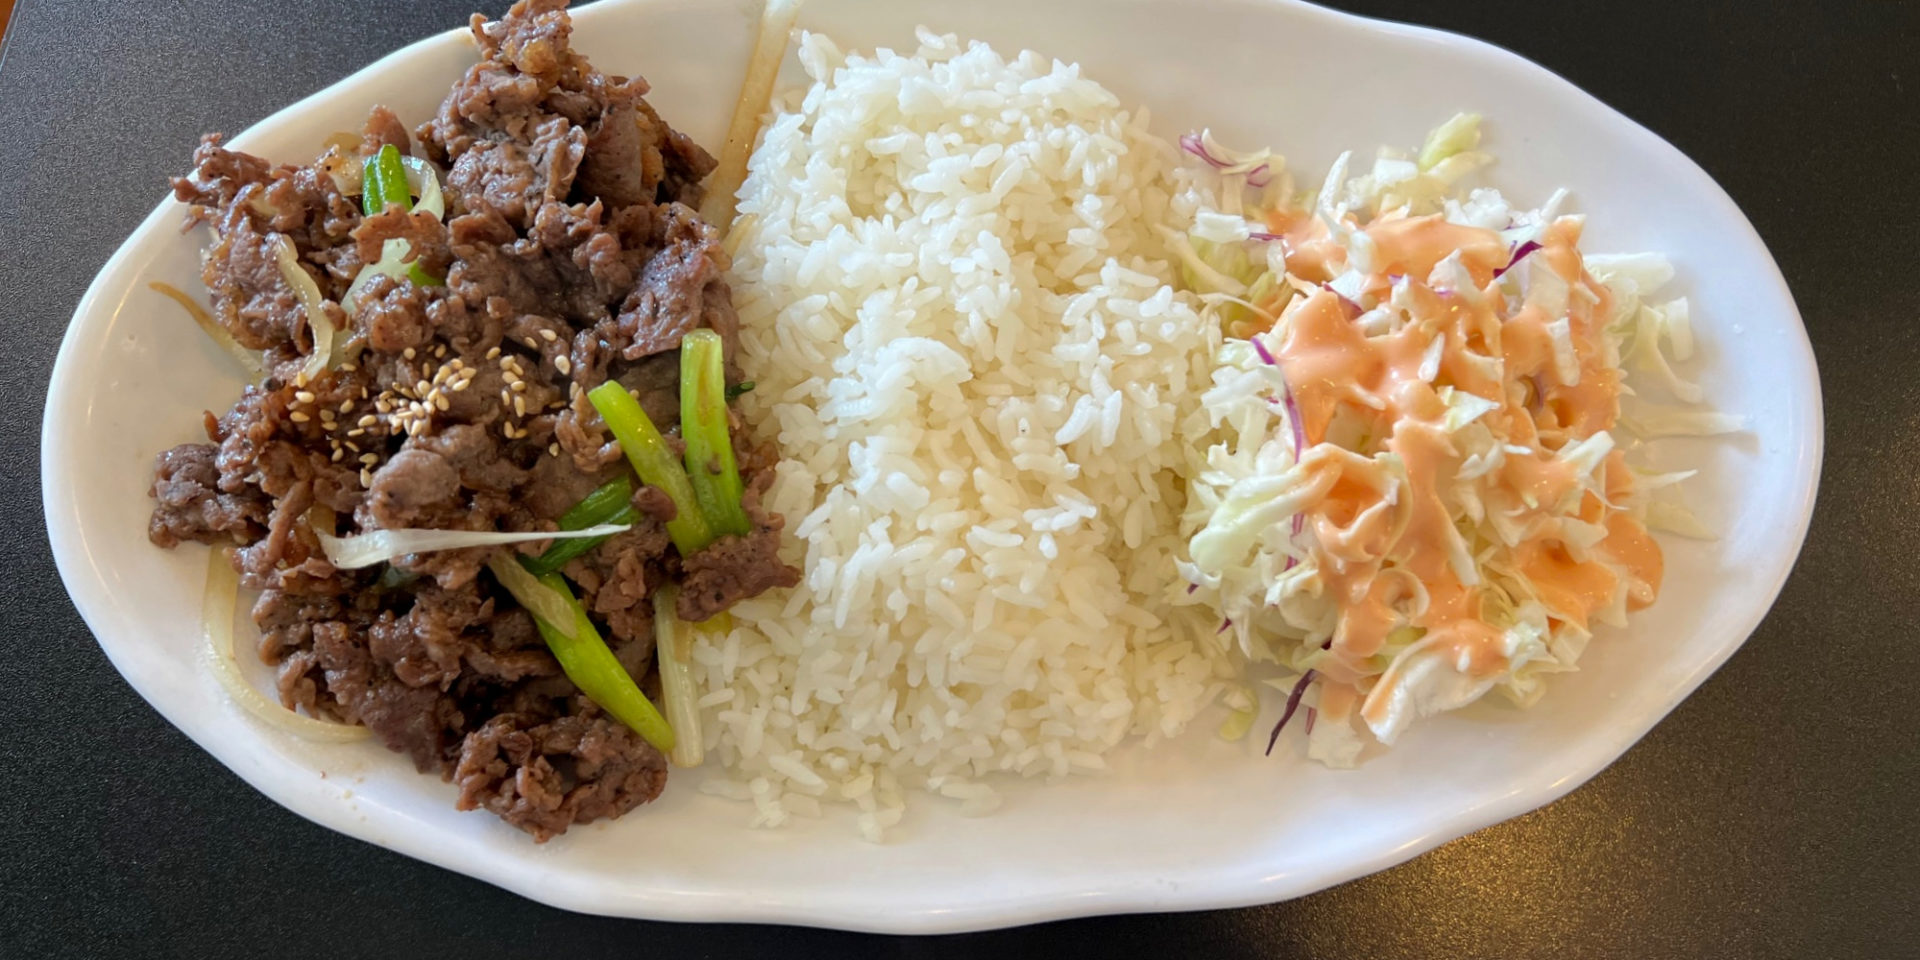 Beef bulgogi lunch special with white rice and a simple cabbage salad from San Maru in Champaign.